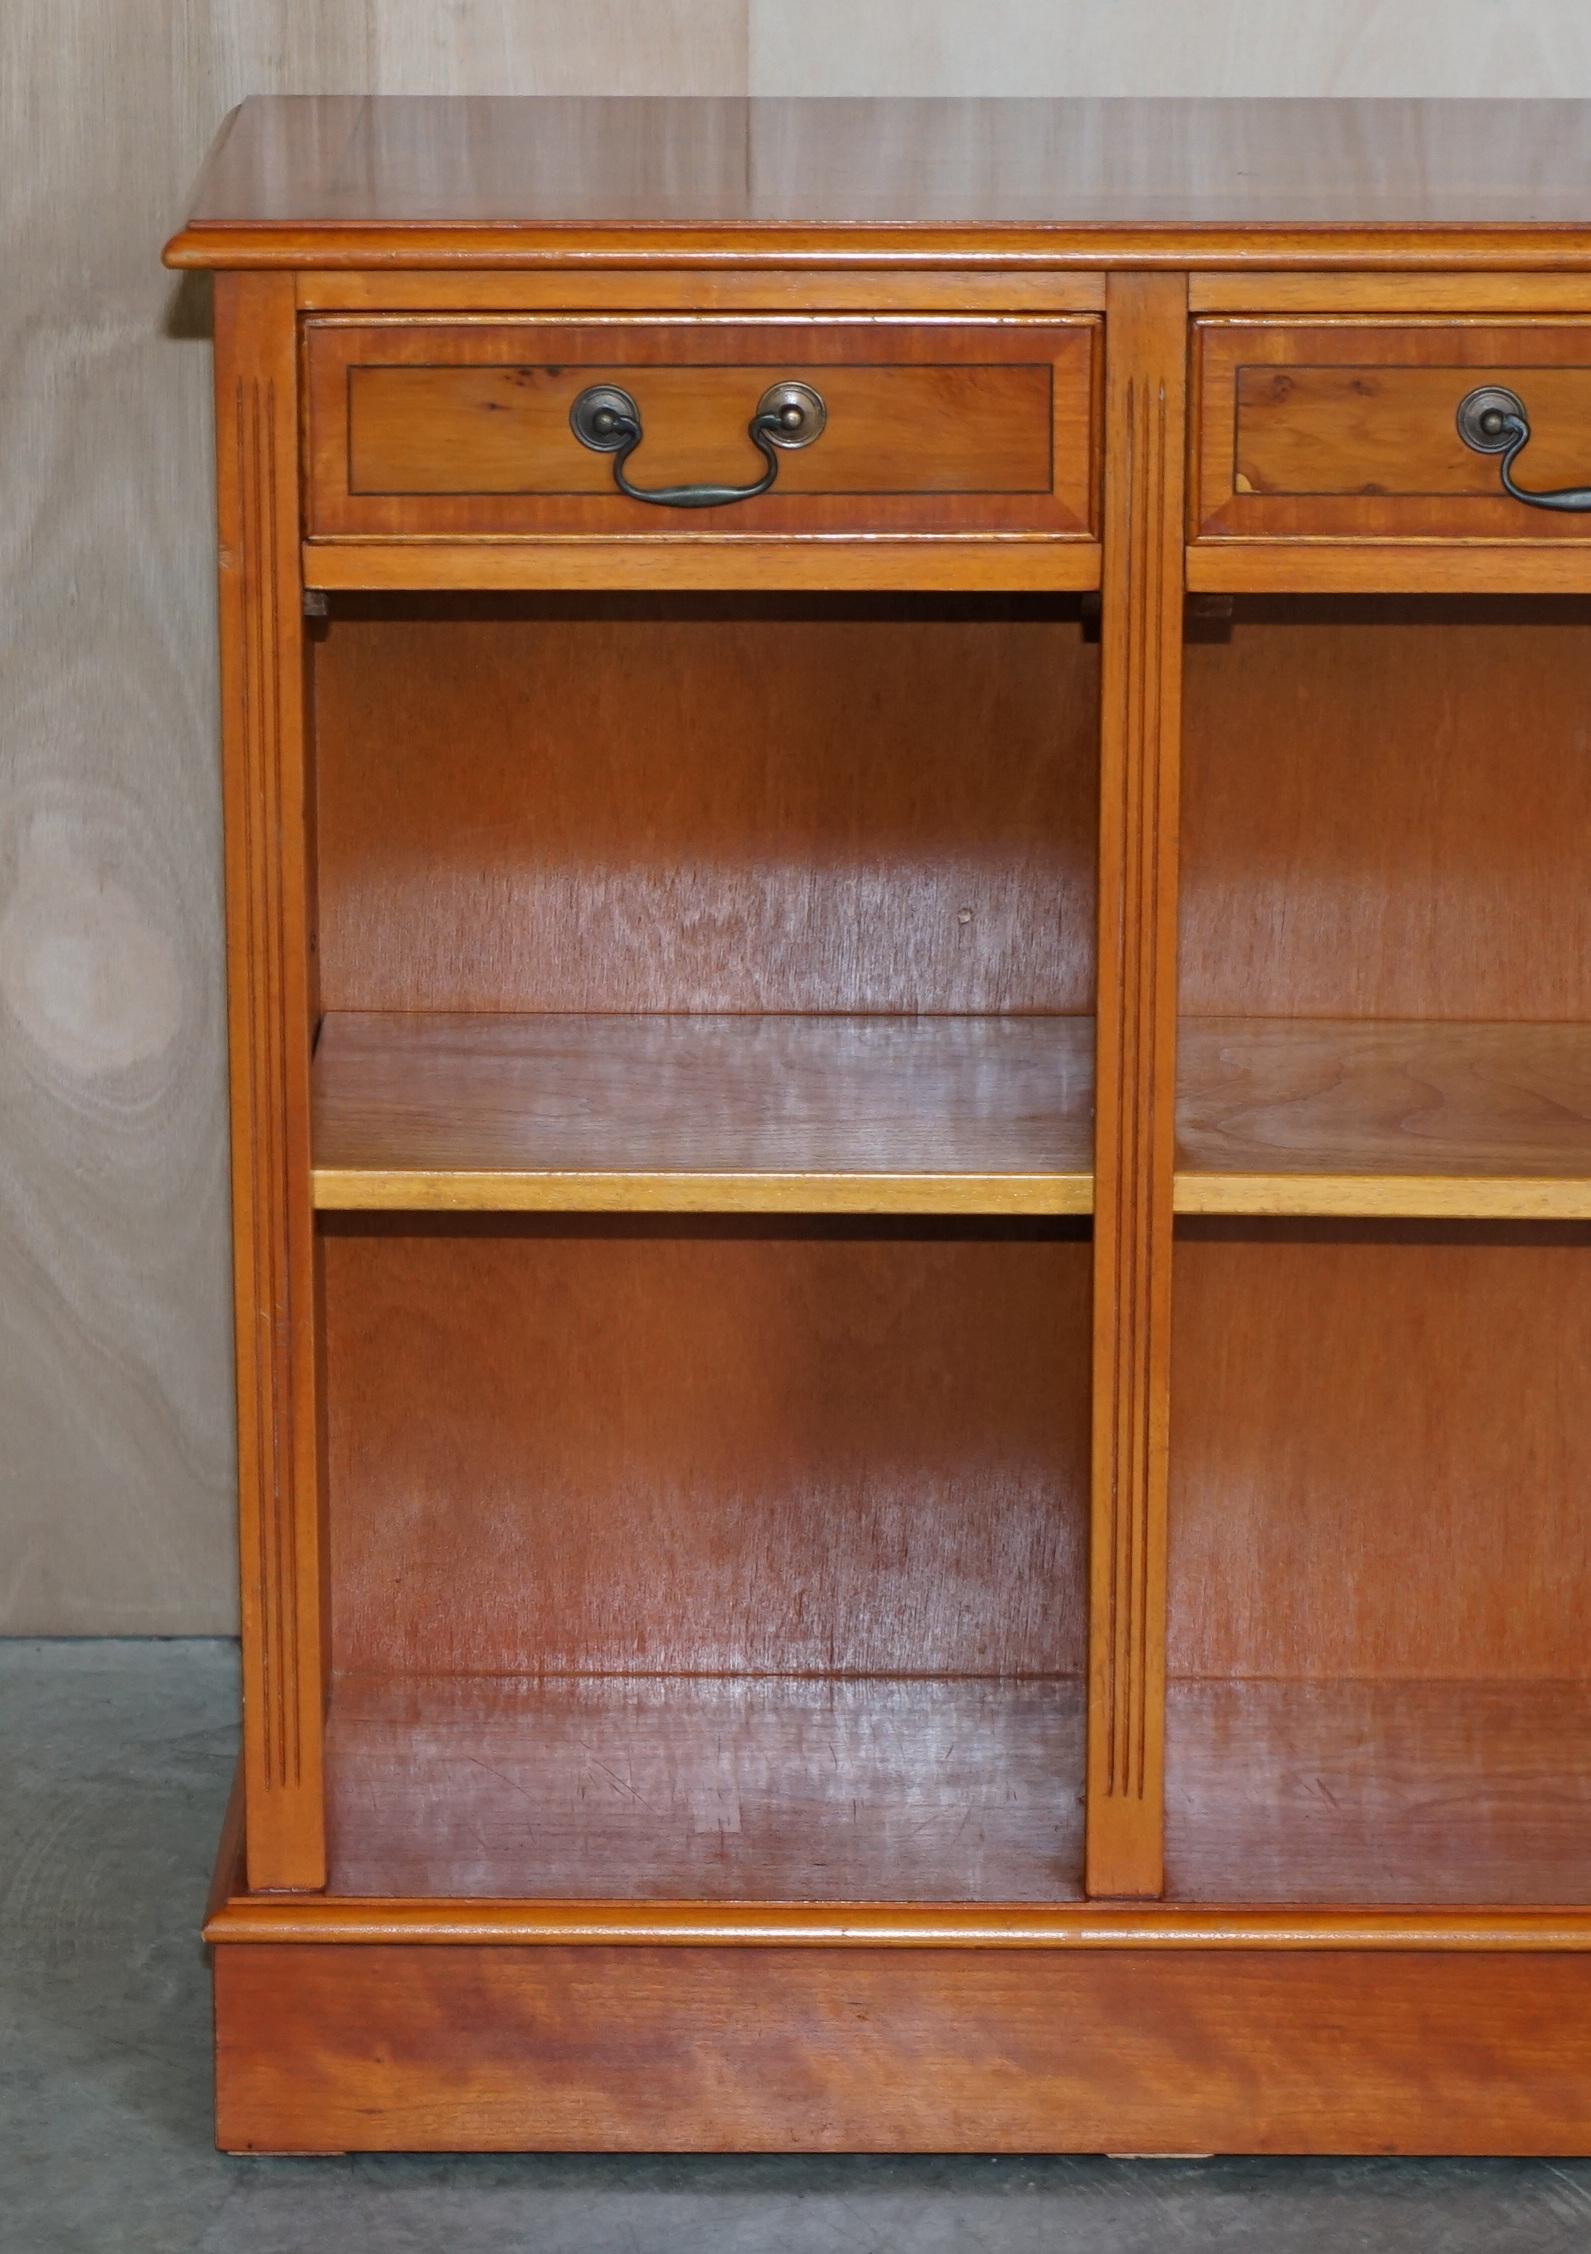 Victorian Vintage Burr Yew Wood Dwarf Open Bookcase / Sideboard with Three Large Drawers For Sale